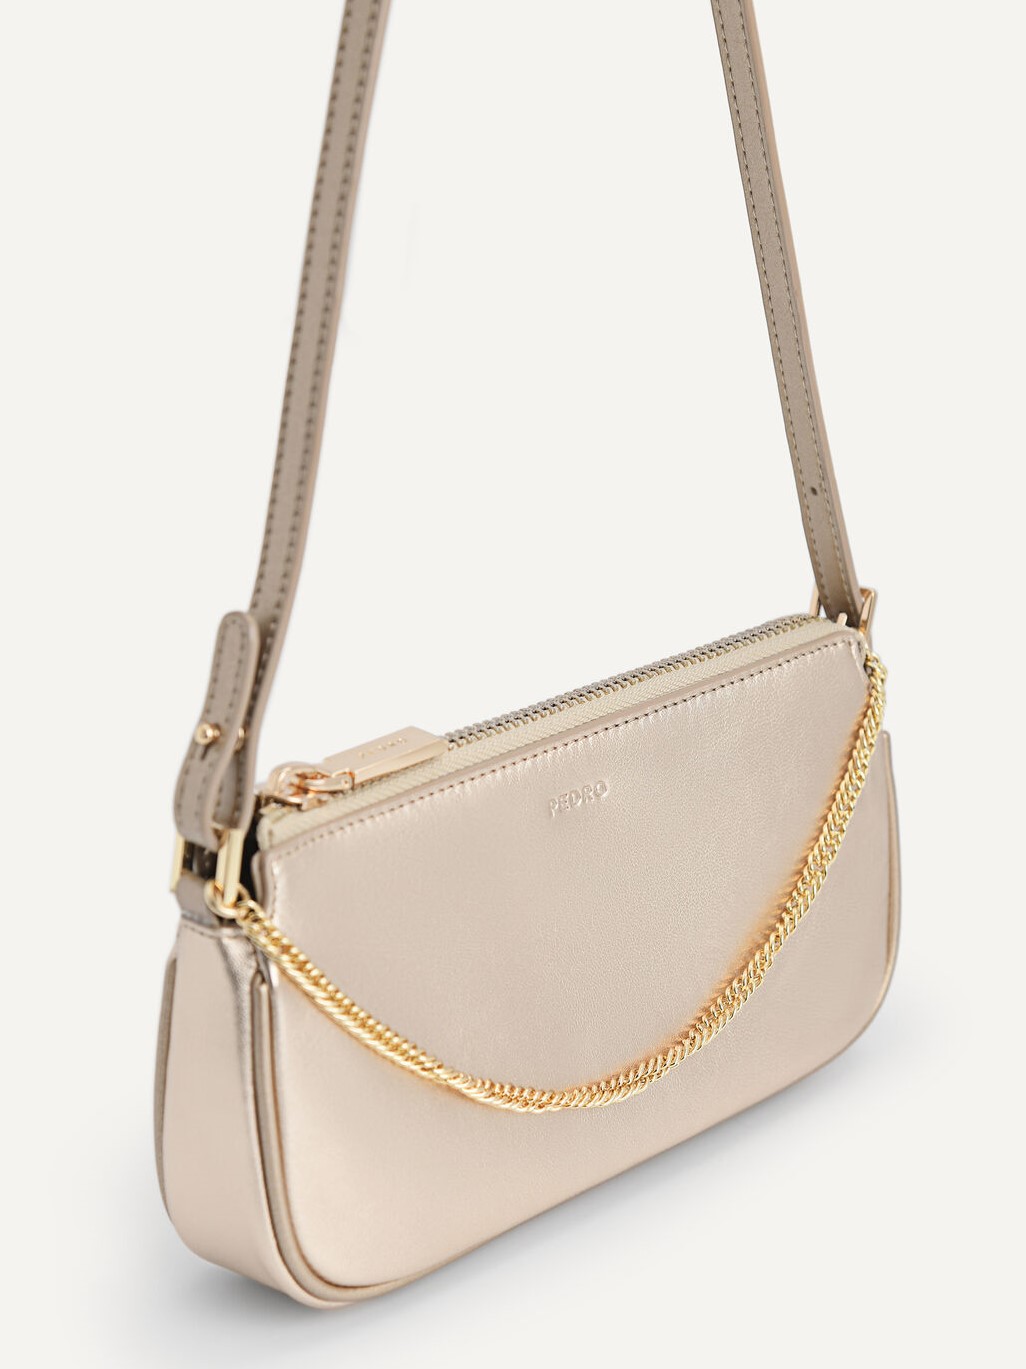 TÚI XÁCH PEDRO MADDY LEATHER CHAIN DETAILED SHOULDER BAG 12